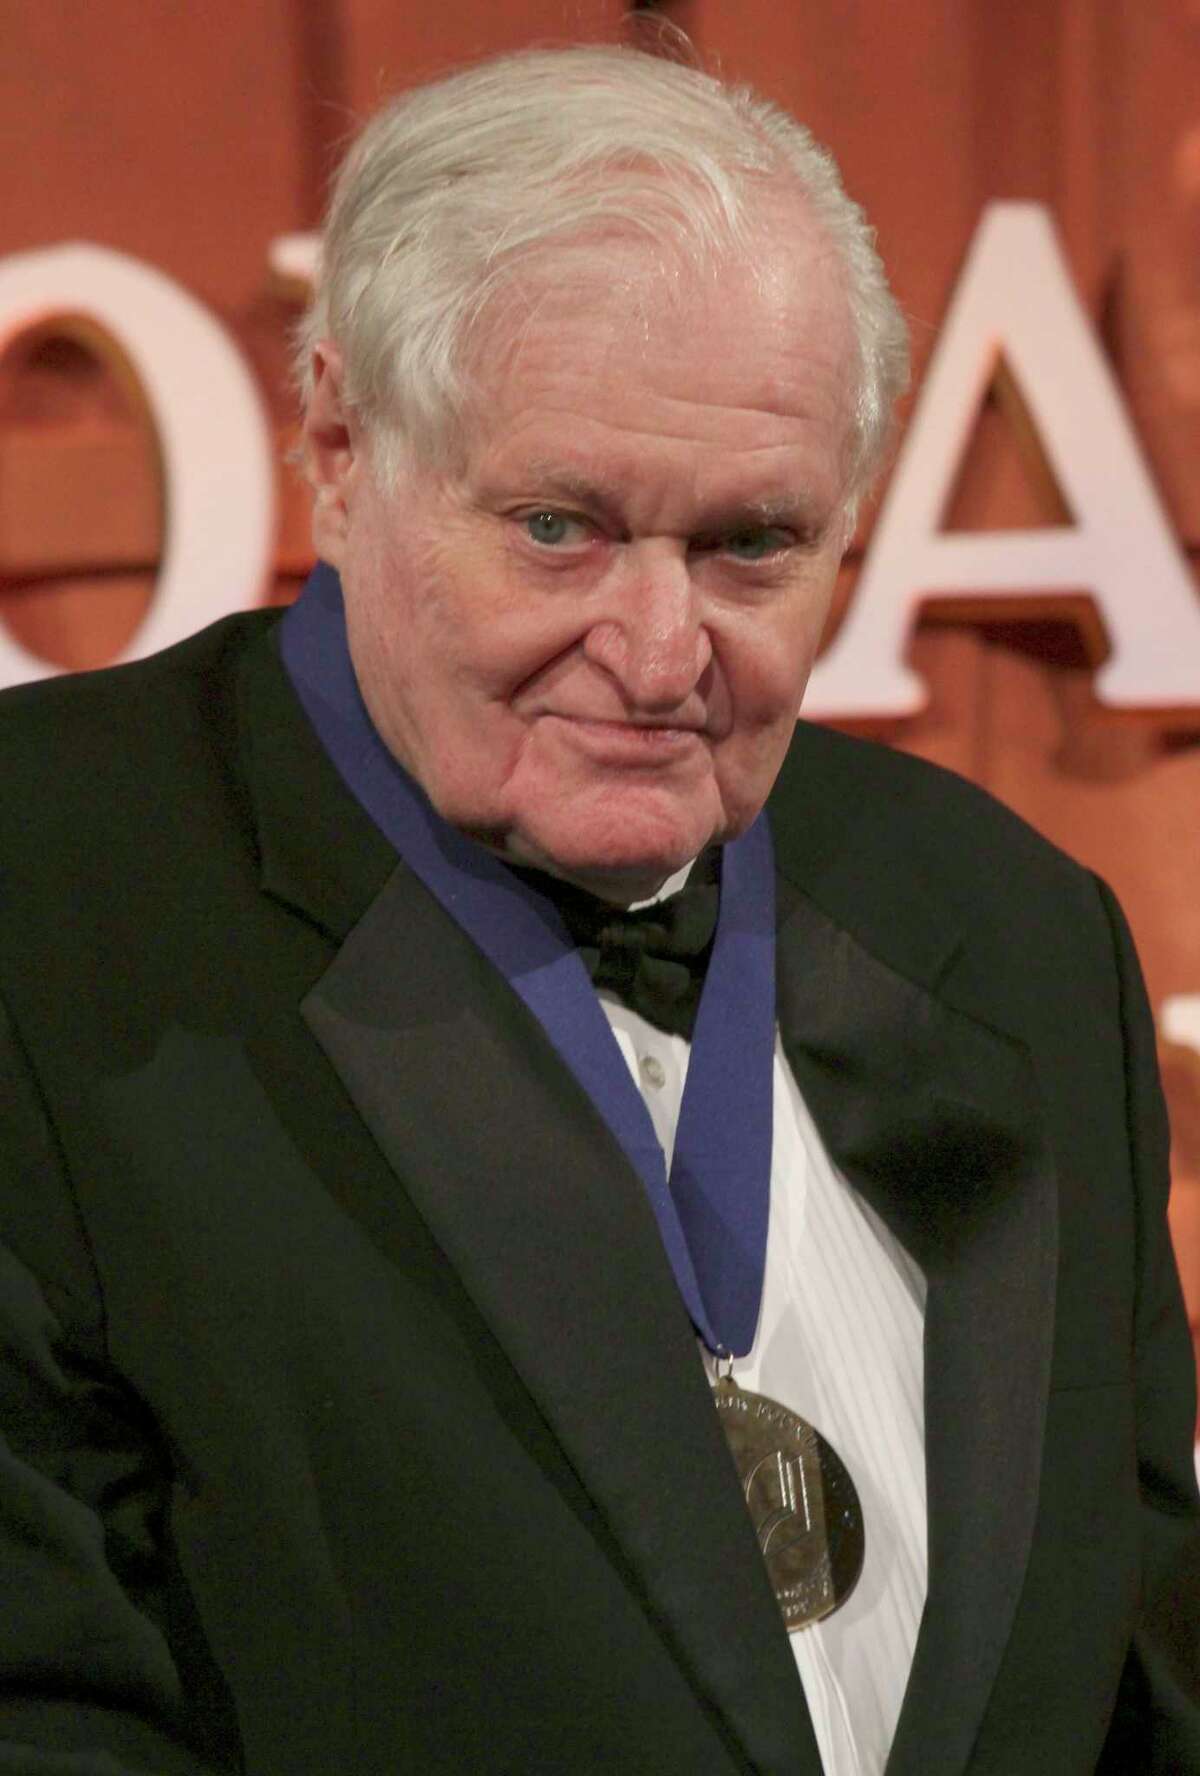 FILE - In this Wednesday Nov. 16, 2011, file photo,John Ashbery poses for photographs after being presented with the 2011 Medal for Distinguished Contribution to American Letters at the National Book Awards in New York. Ashbery, widely regarded as one of the world's greatest poets, died Sunday, Sept. 3, 2017, at home in Hudson, New York, of natural causes, according to husband, David Kermani. He was 90. (AP Photo/Tina Fineberg, File)